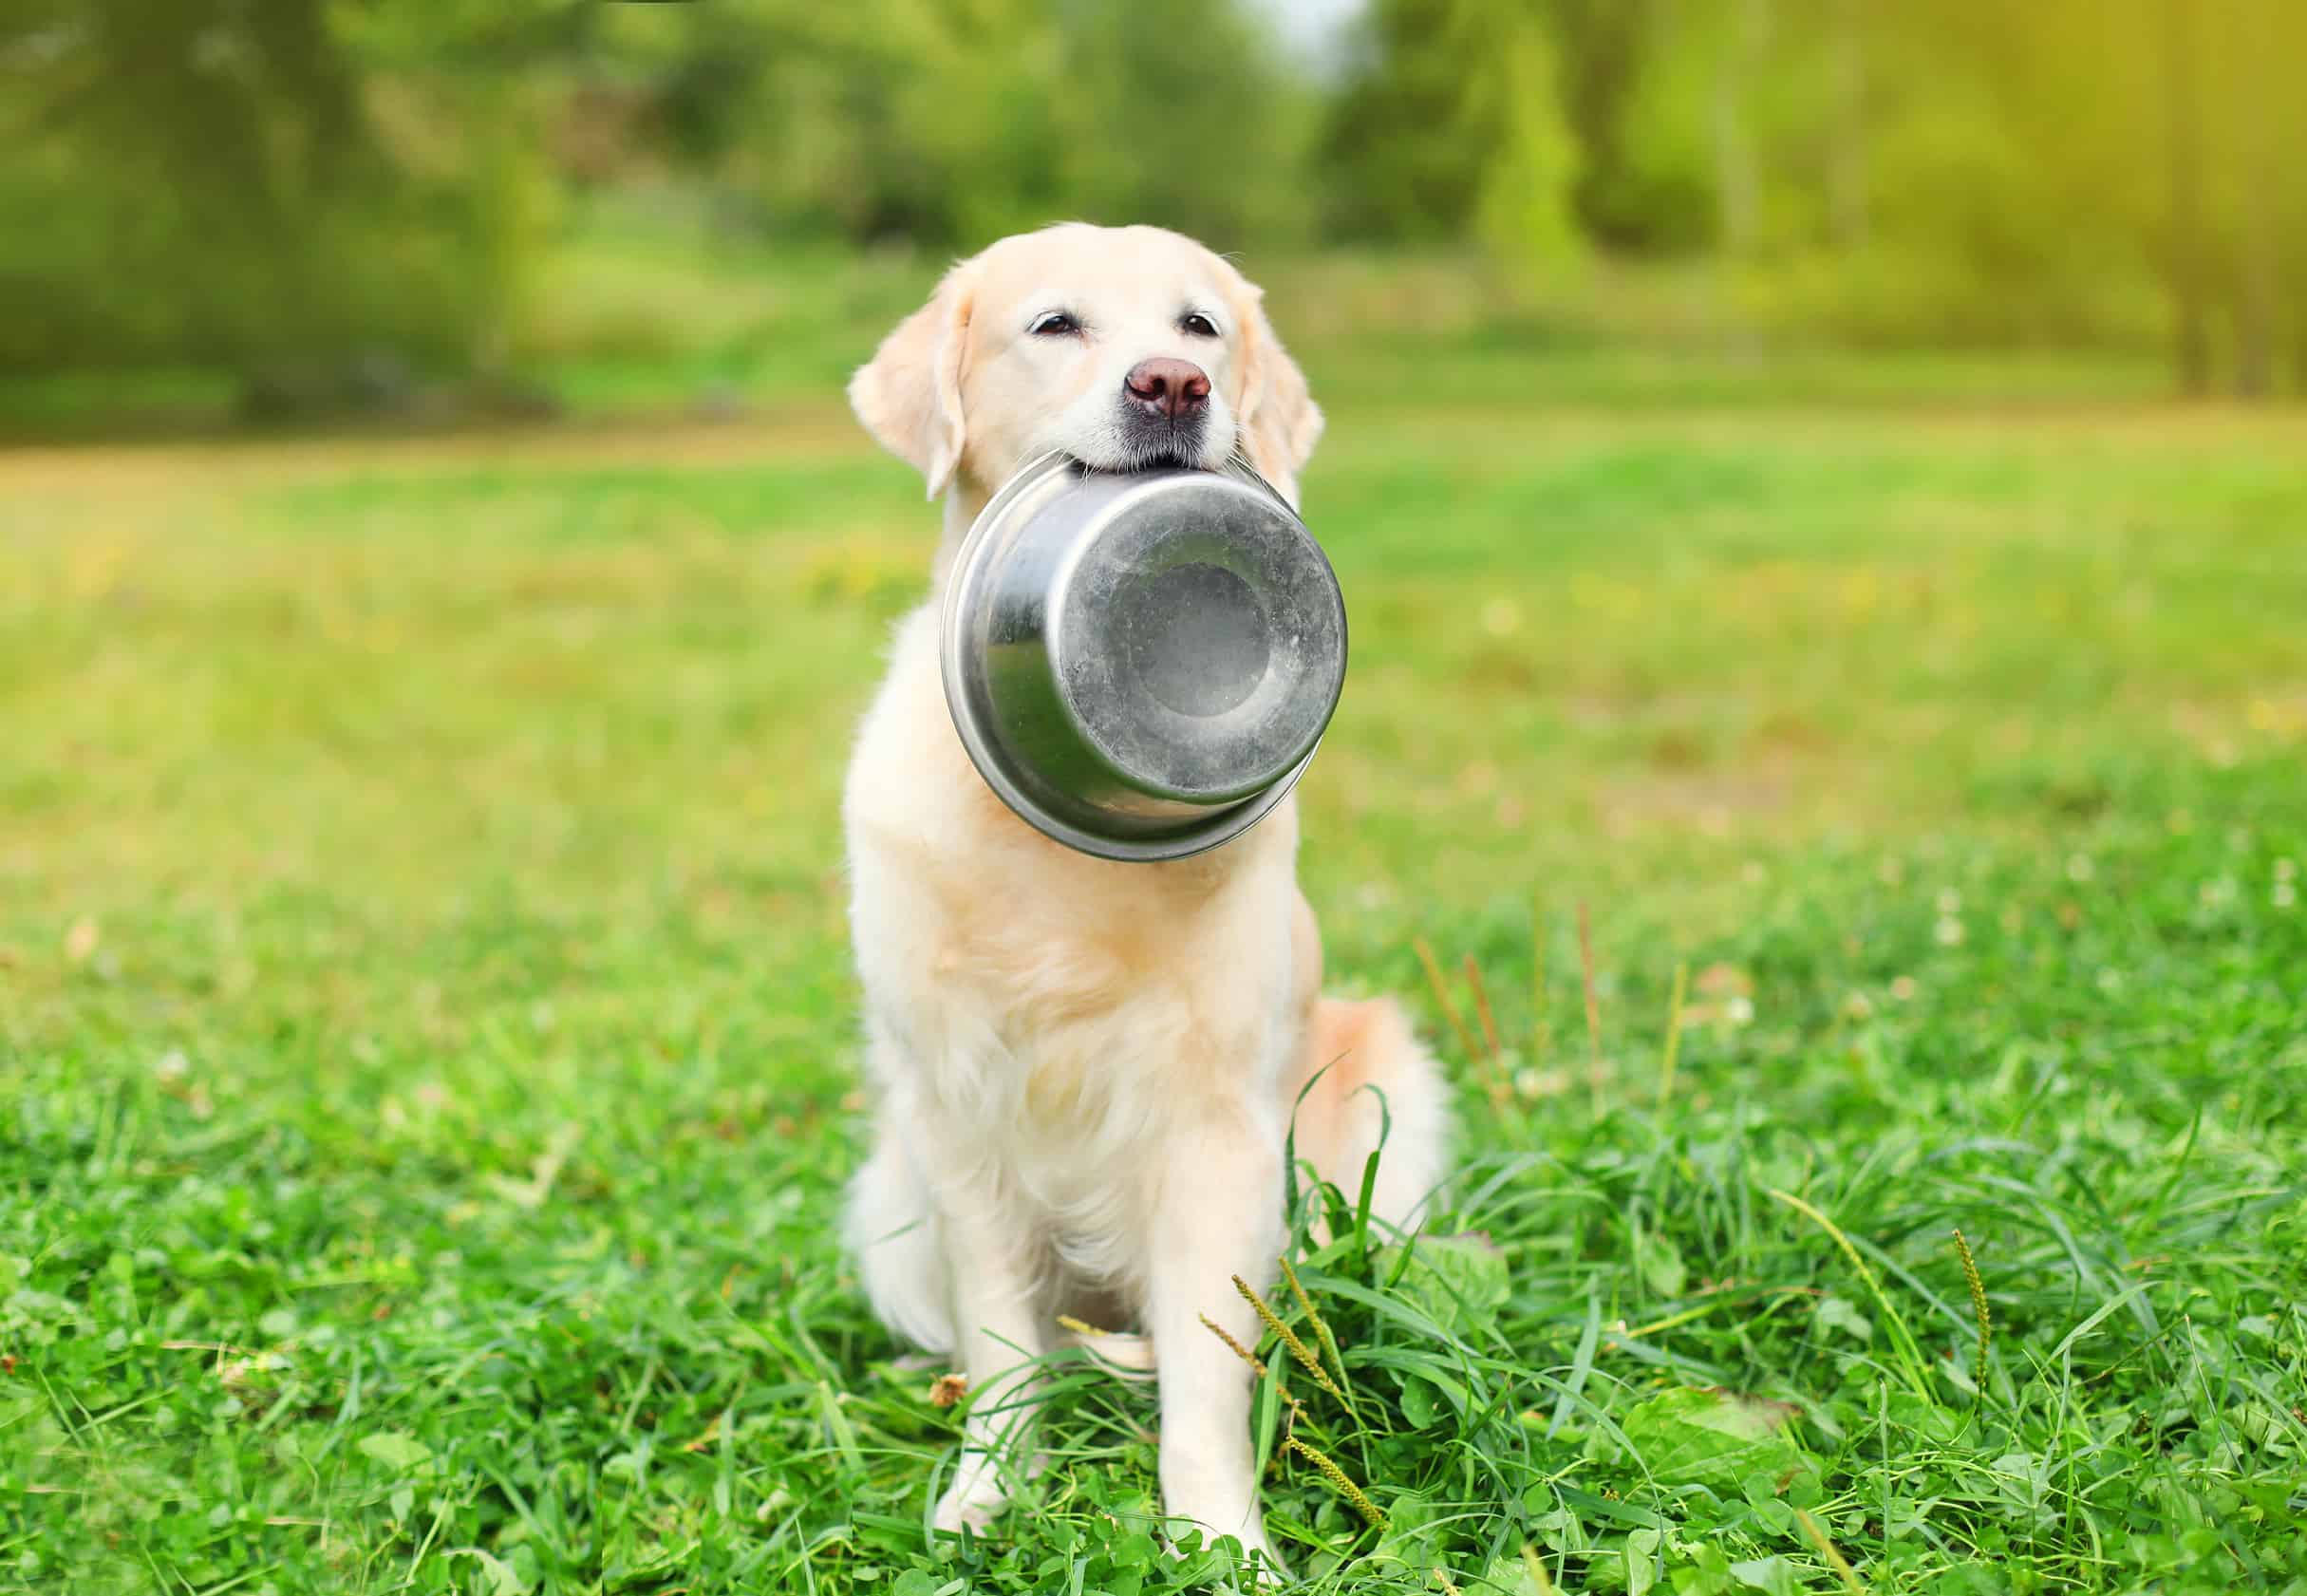 The perfect ingredients when cooking up a natural diet for dogs